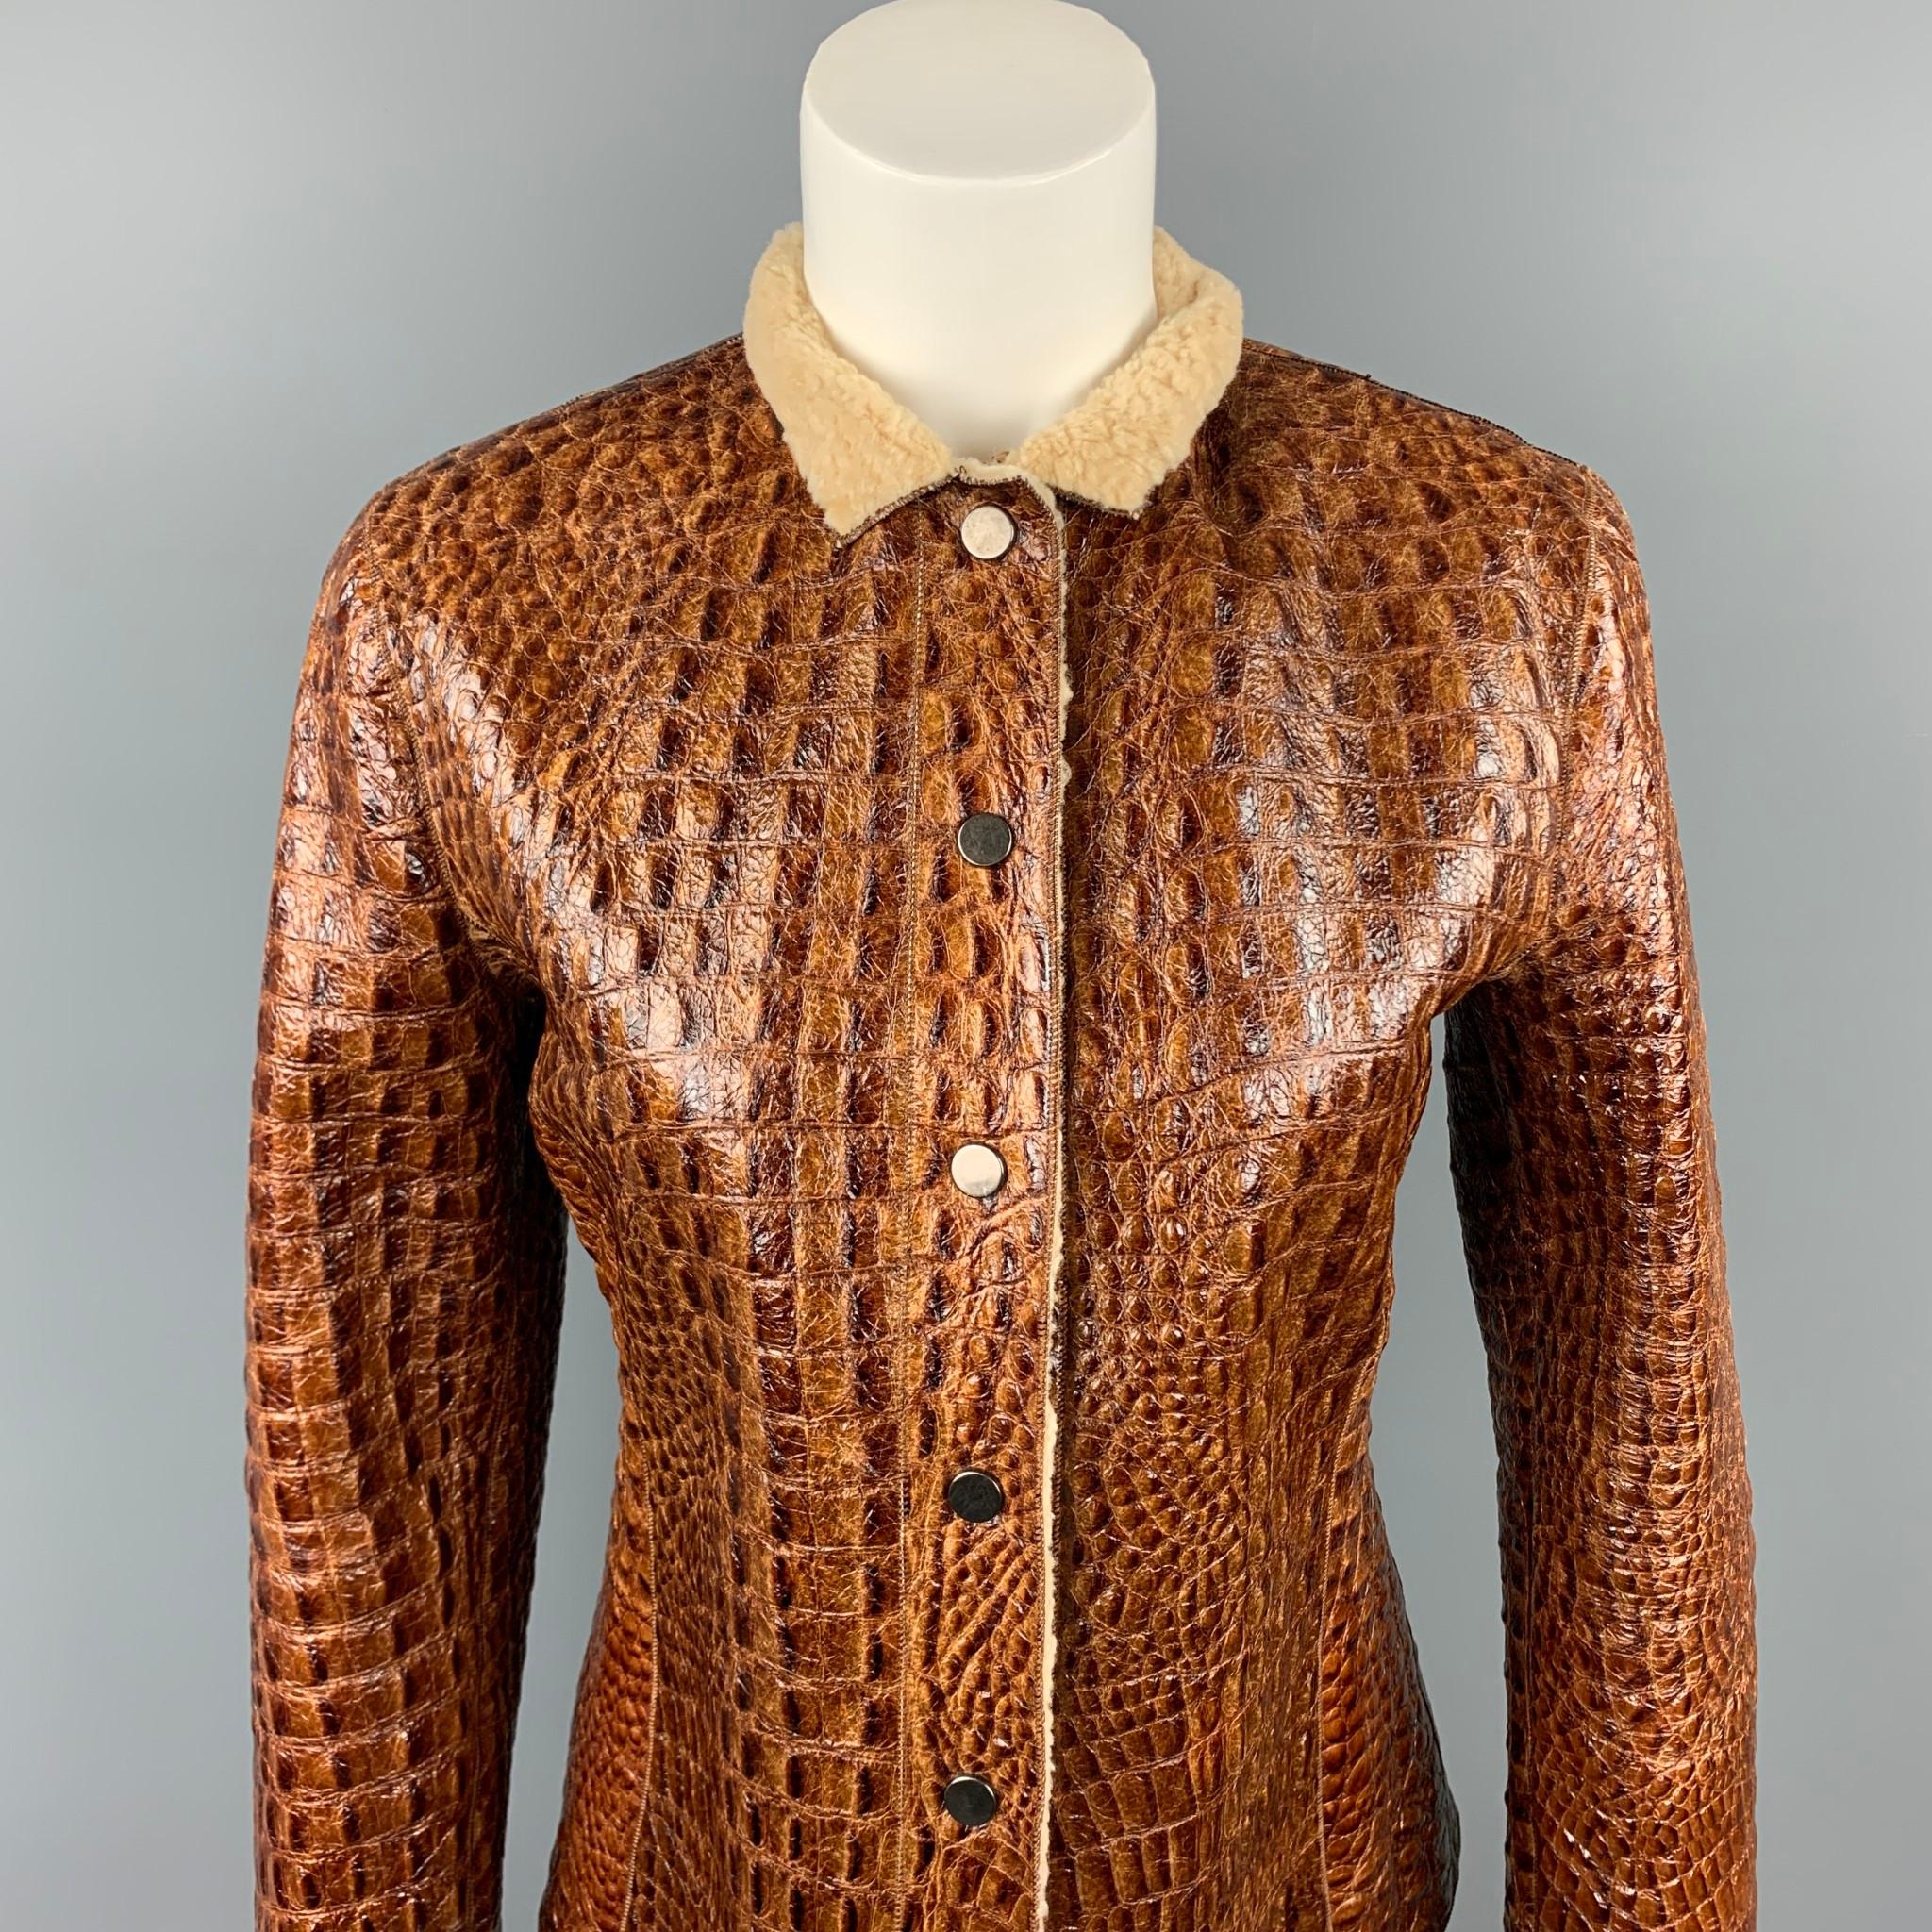 ARMANI COLLEZIONI jacket comes in a brown embossed leather wit a fur liner featuring a collar and a snap button closure. Made in Italy.

Very Good Pre-Owned Condition.
Marked: IT 40

Measurements:

Shoulder: 16 in.
Bust: 34 in.
Waist: 32 in.
Sleeve: